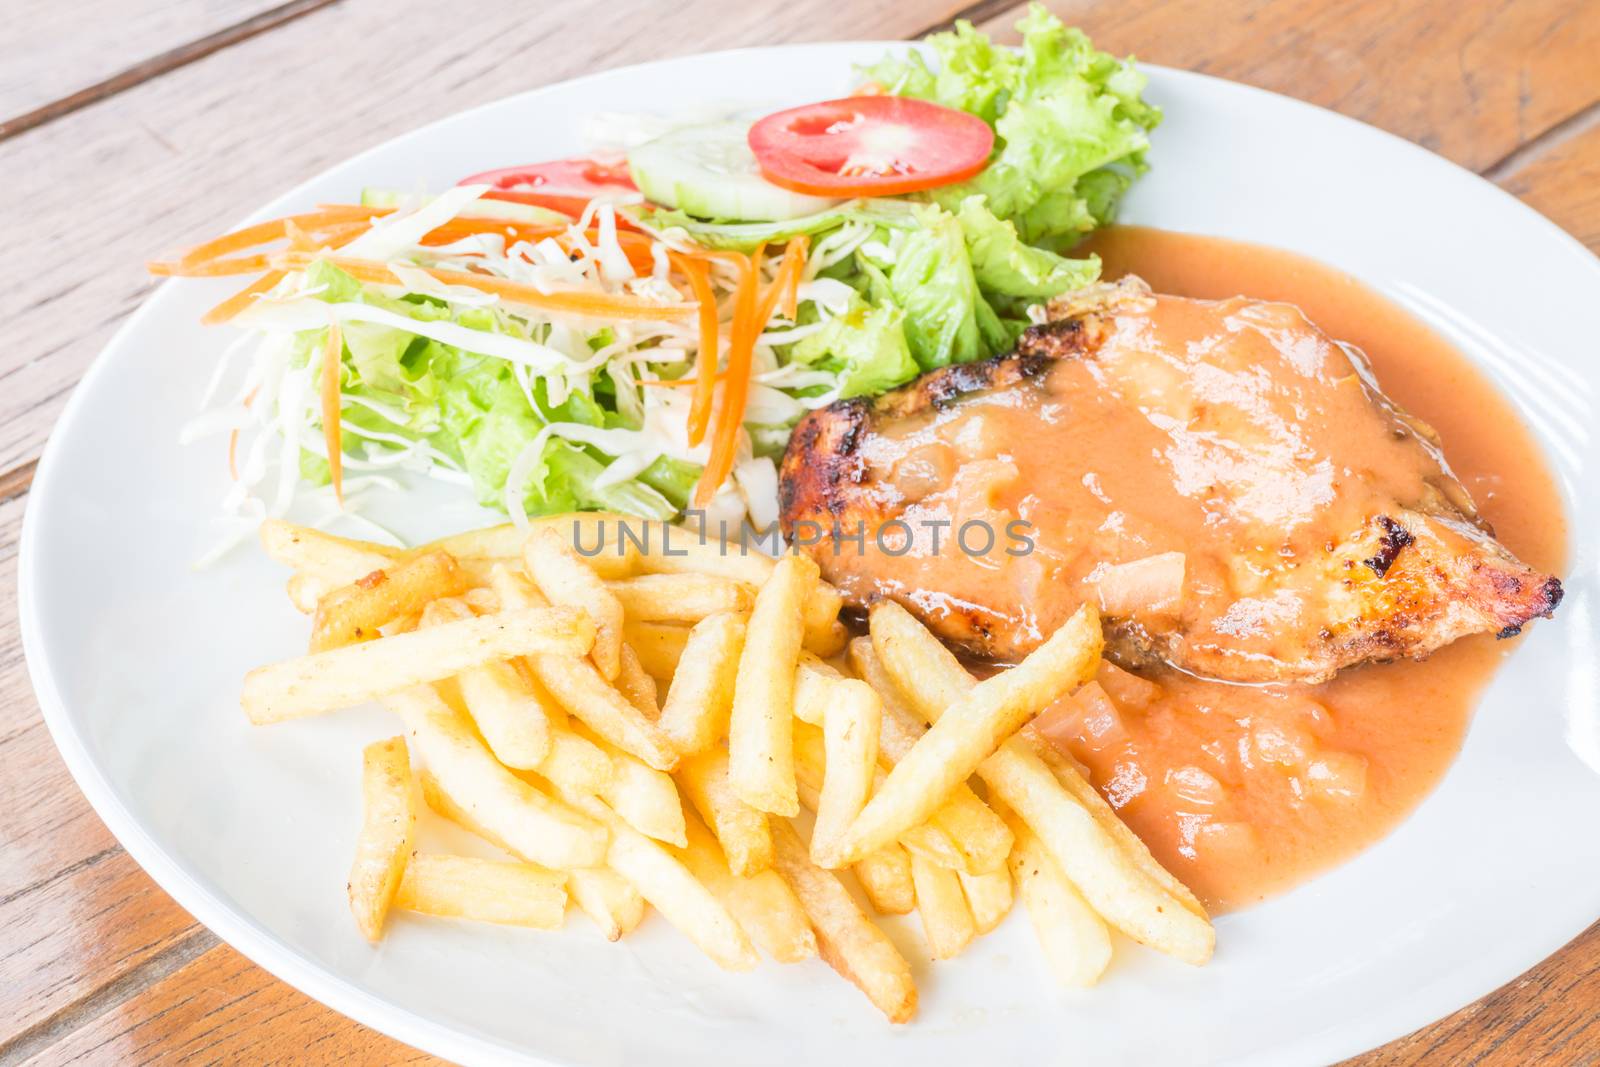 Grilled chicken steak with french fries and vegetables  by punsayaporn